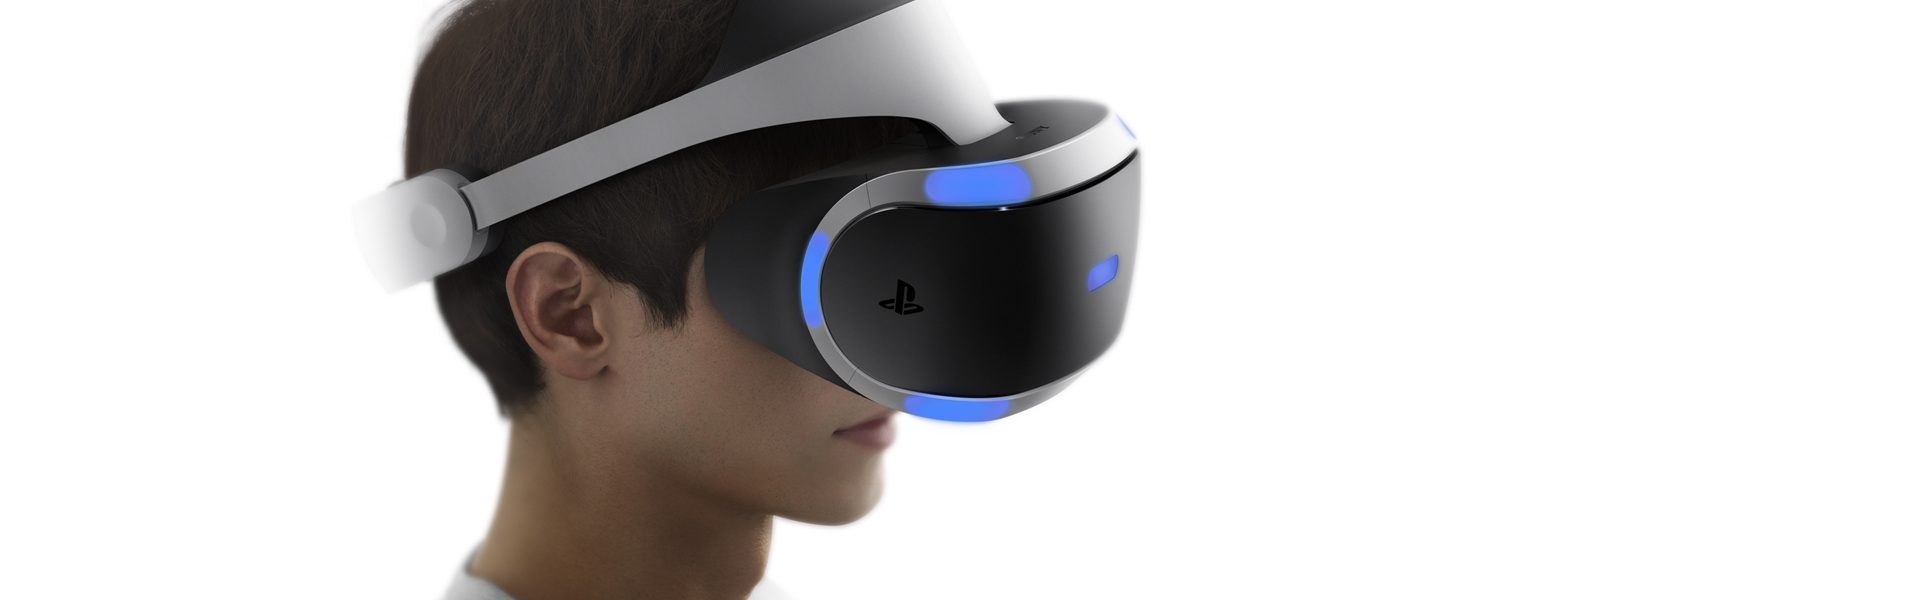 what can you do with playstation vr